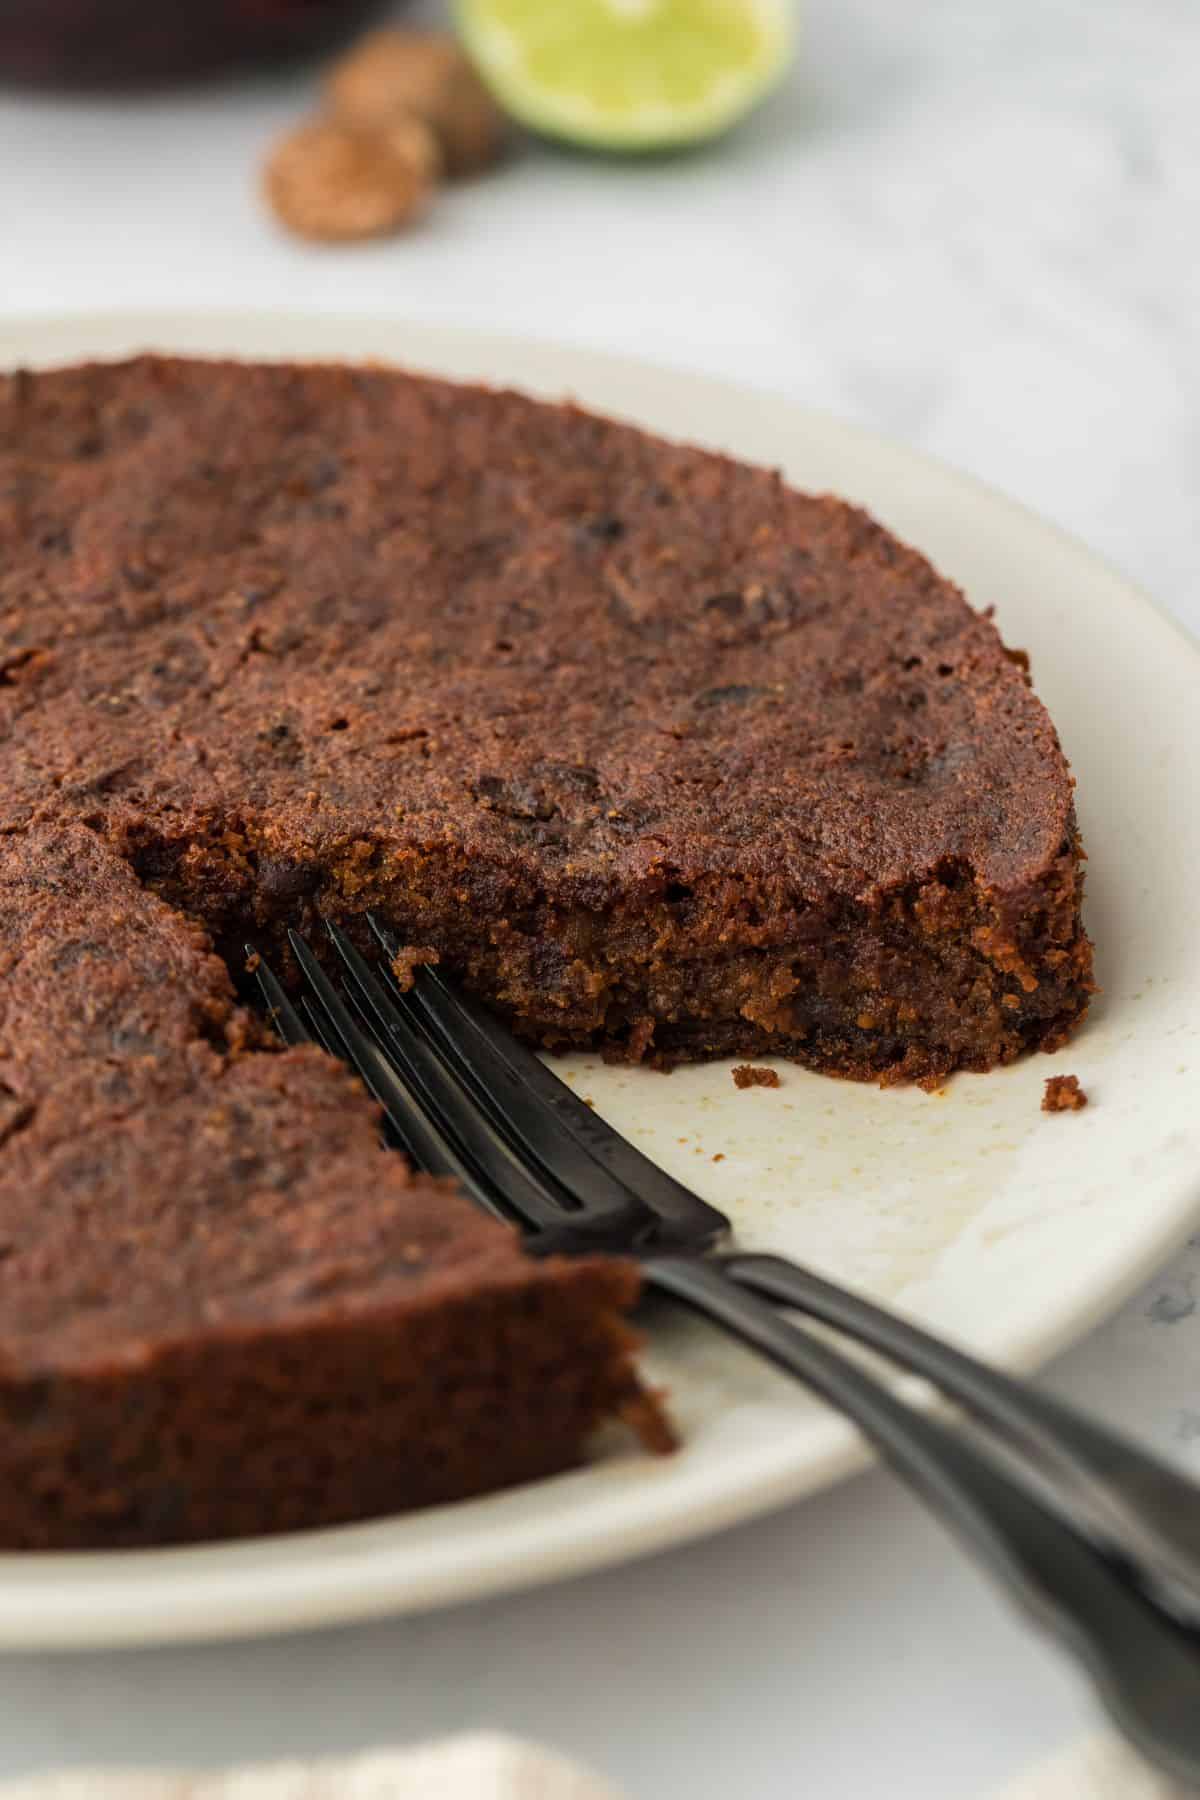 A Jamaican black cake with a slice missing in a white place, with black forks resting where the slice should be

